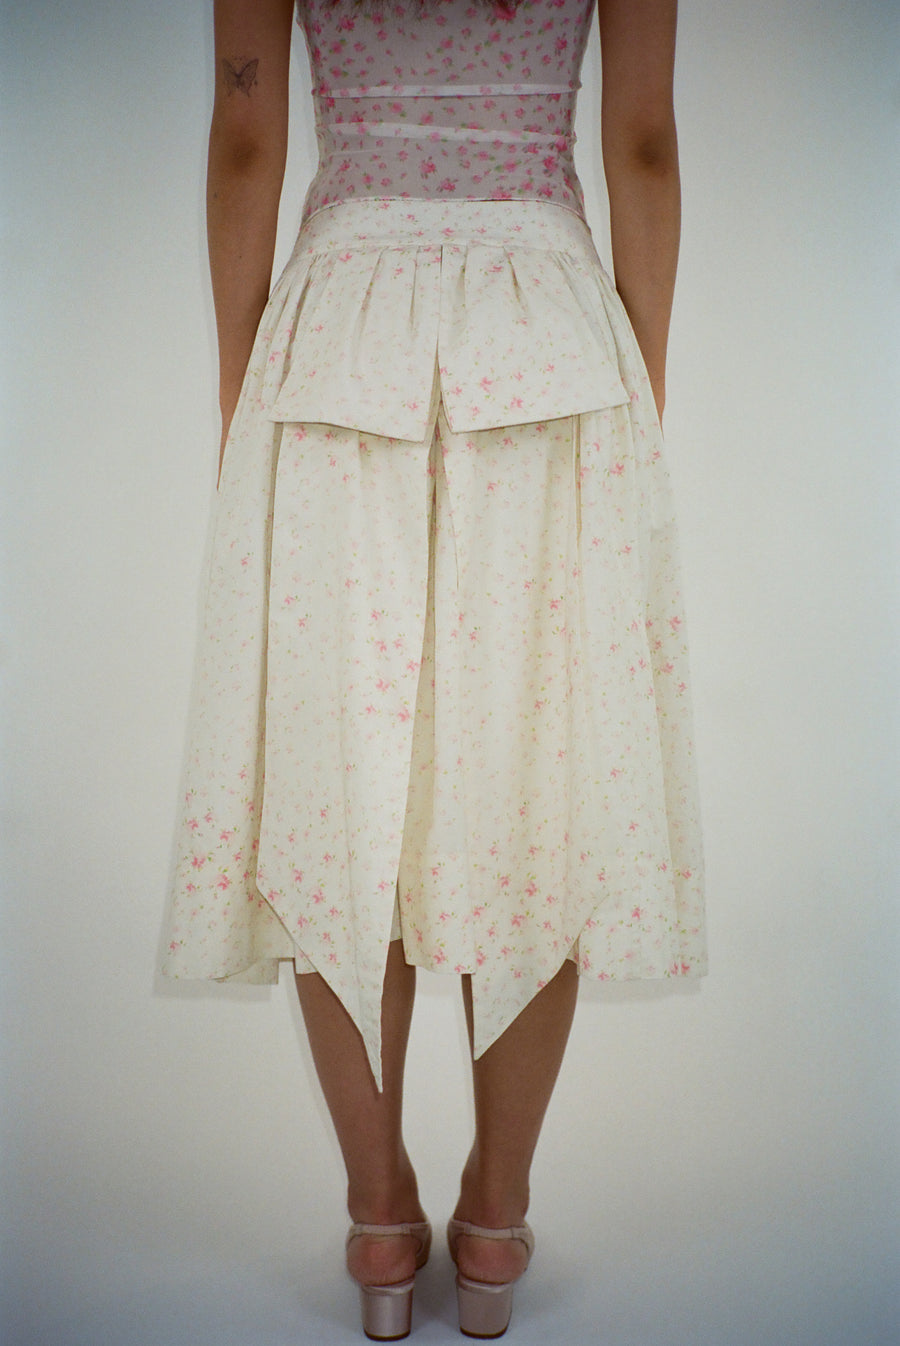 Off white midi skirt with pink floral print and bow at back on model